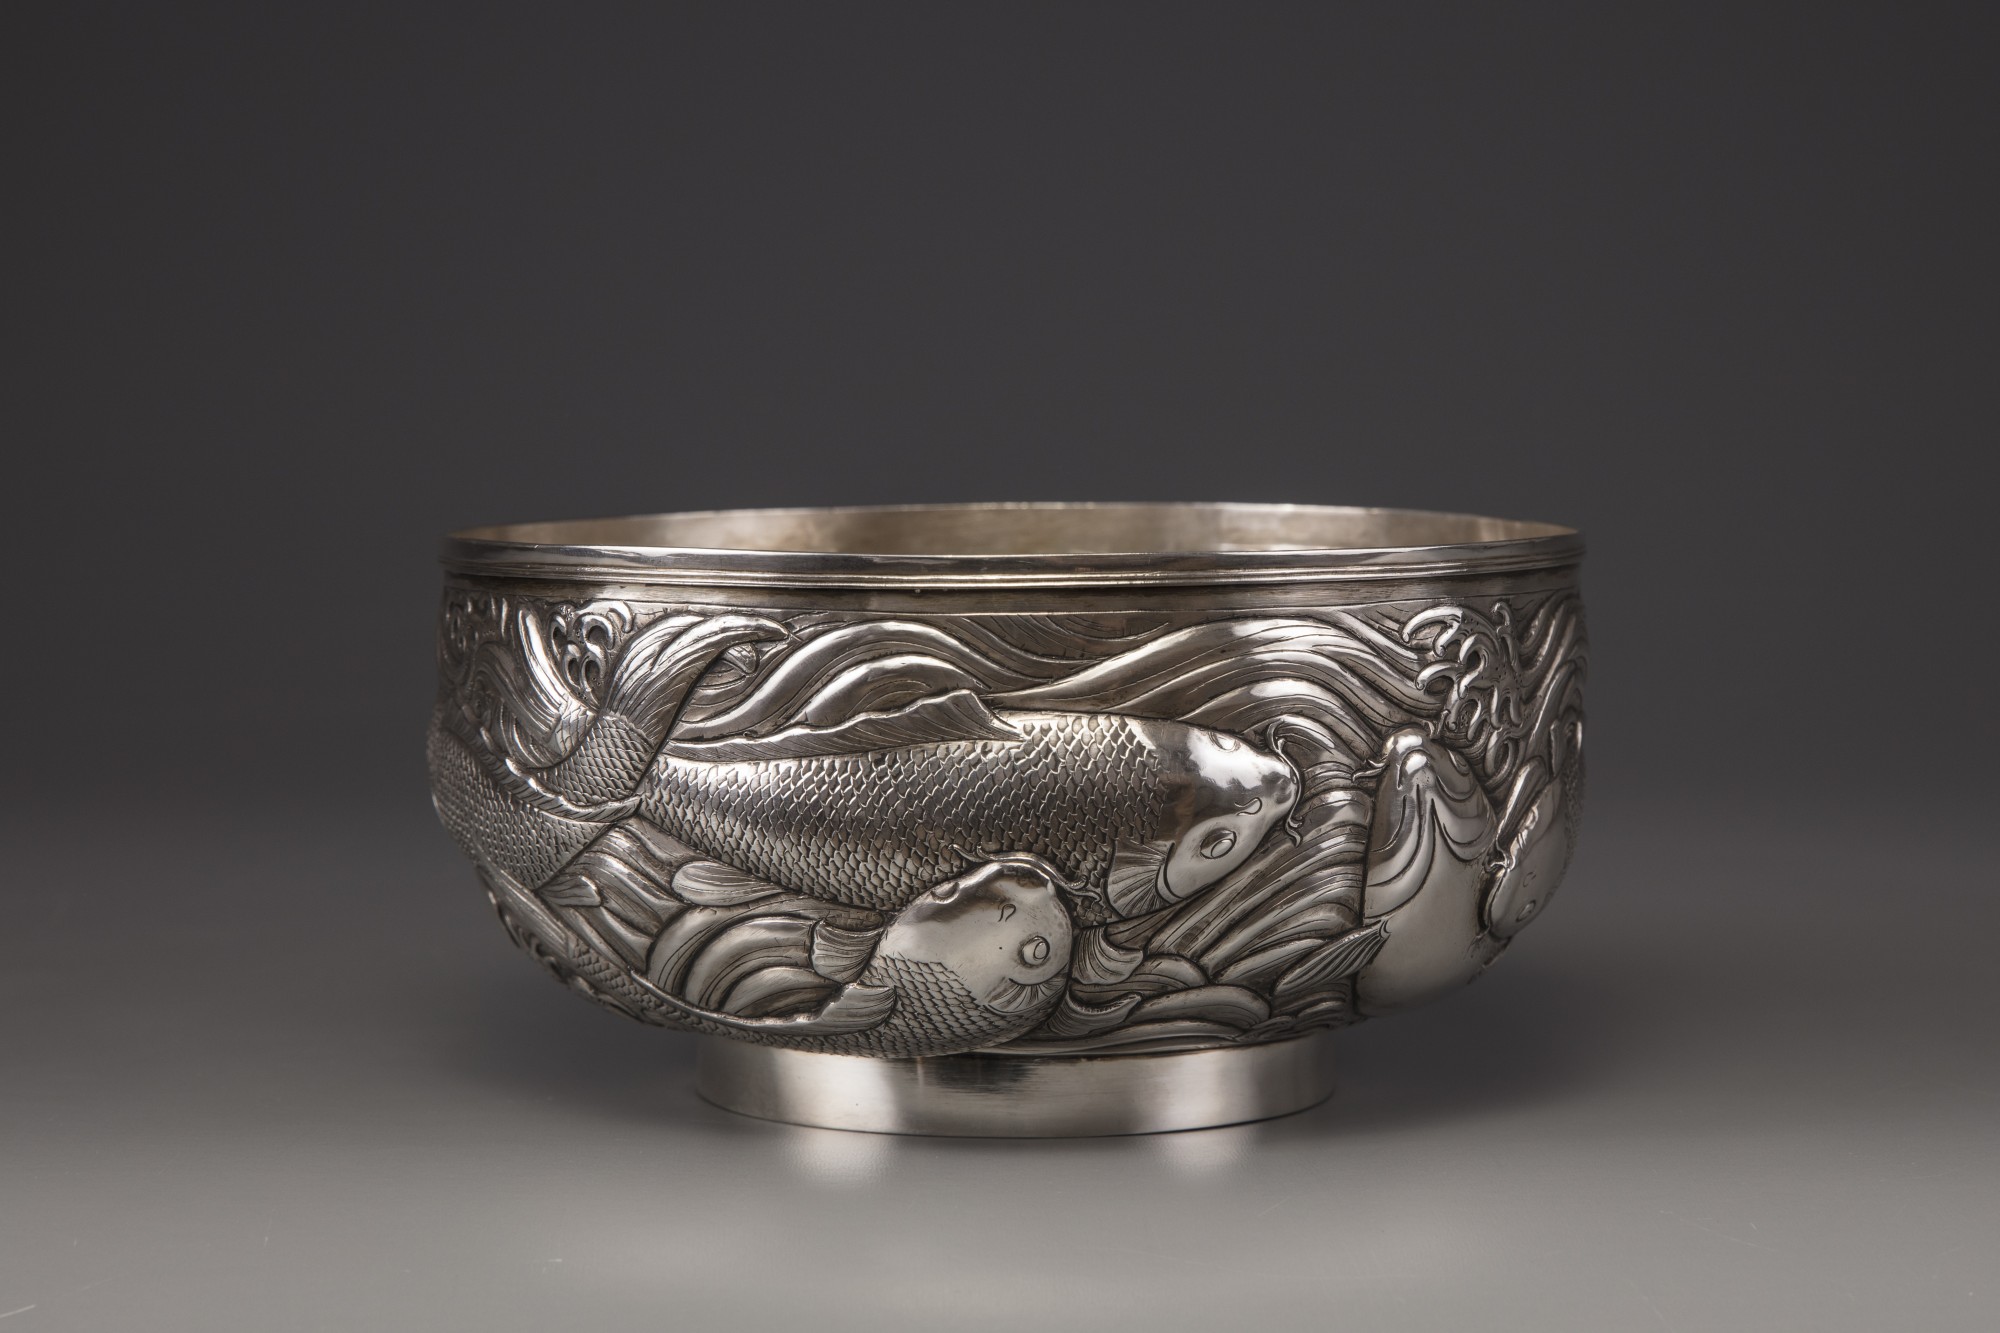 A silver 'carp' bowl, attributed to the Konoike workshop.